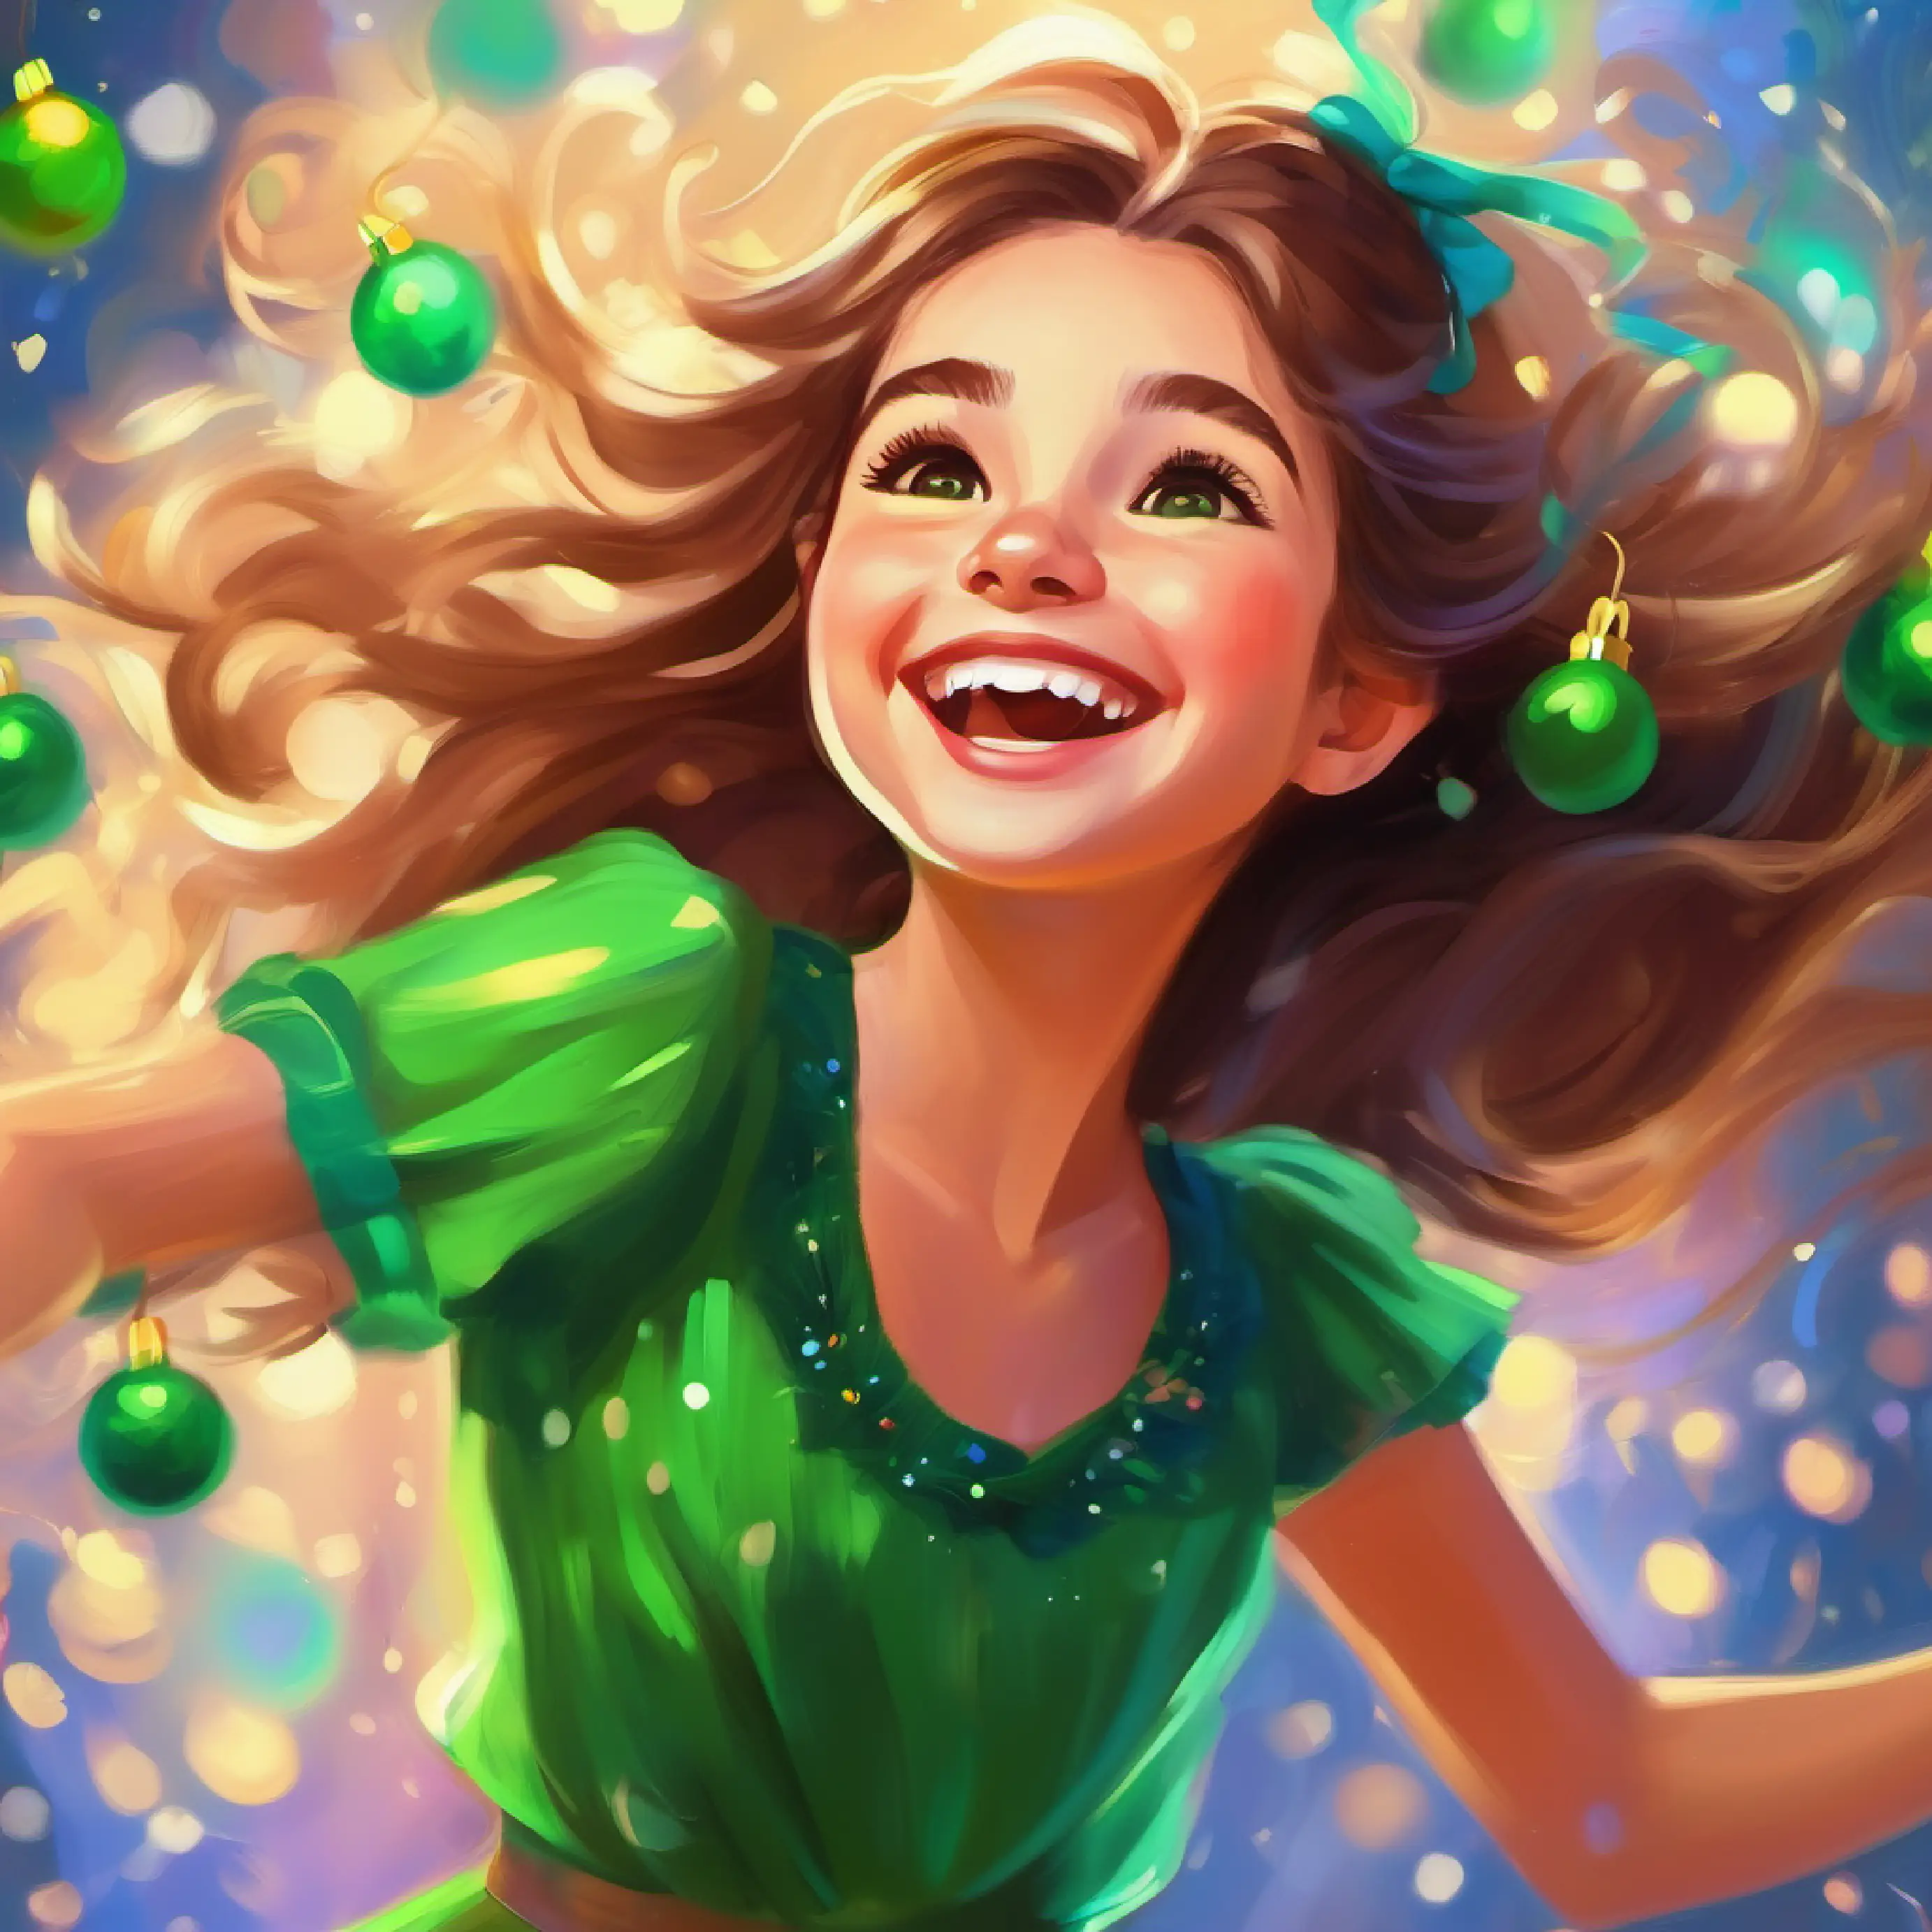 Young girl, cheerful, light-skinned, with bright green eyes happily dancing, laughing, enjoying herself.